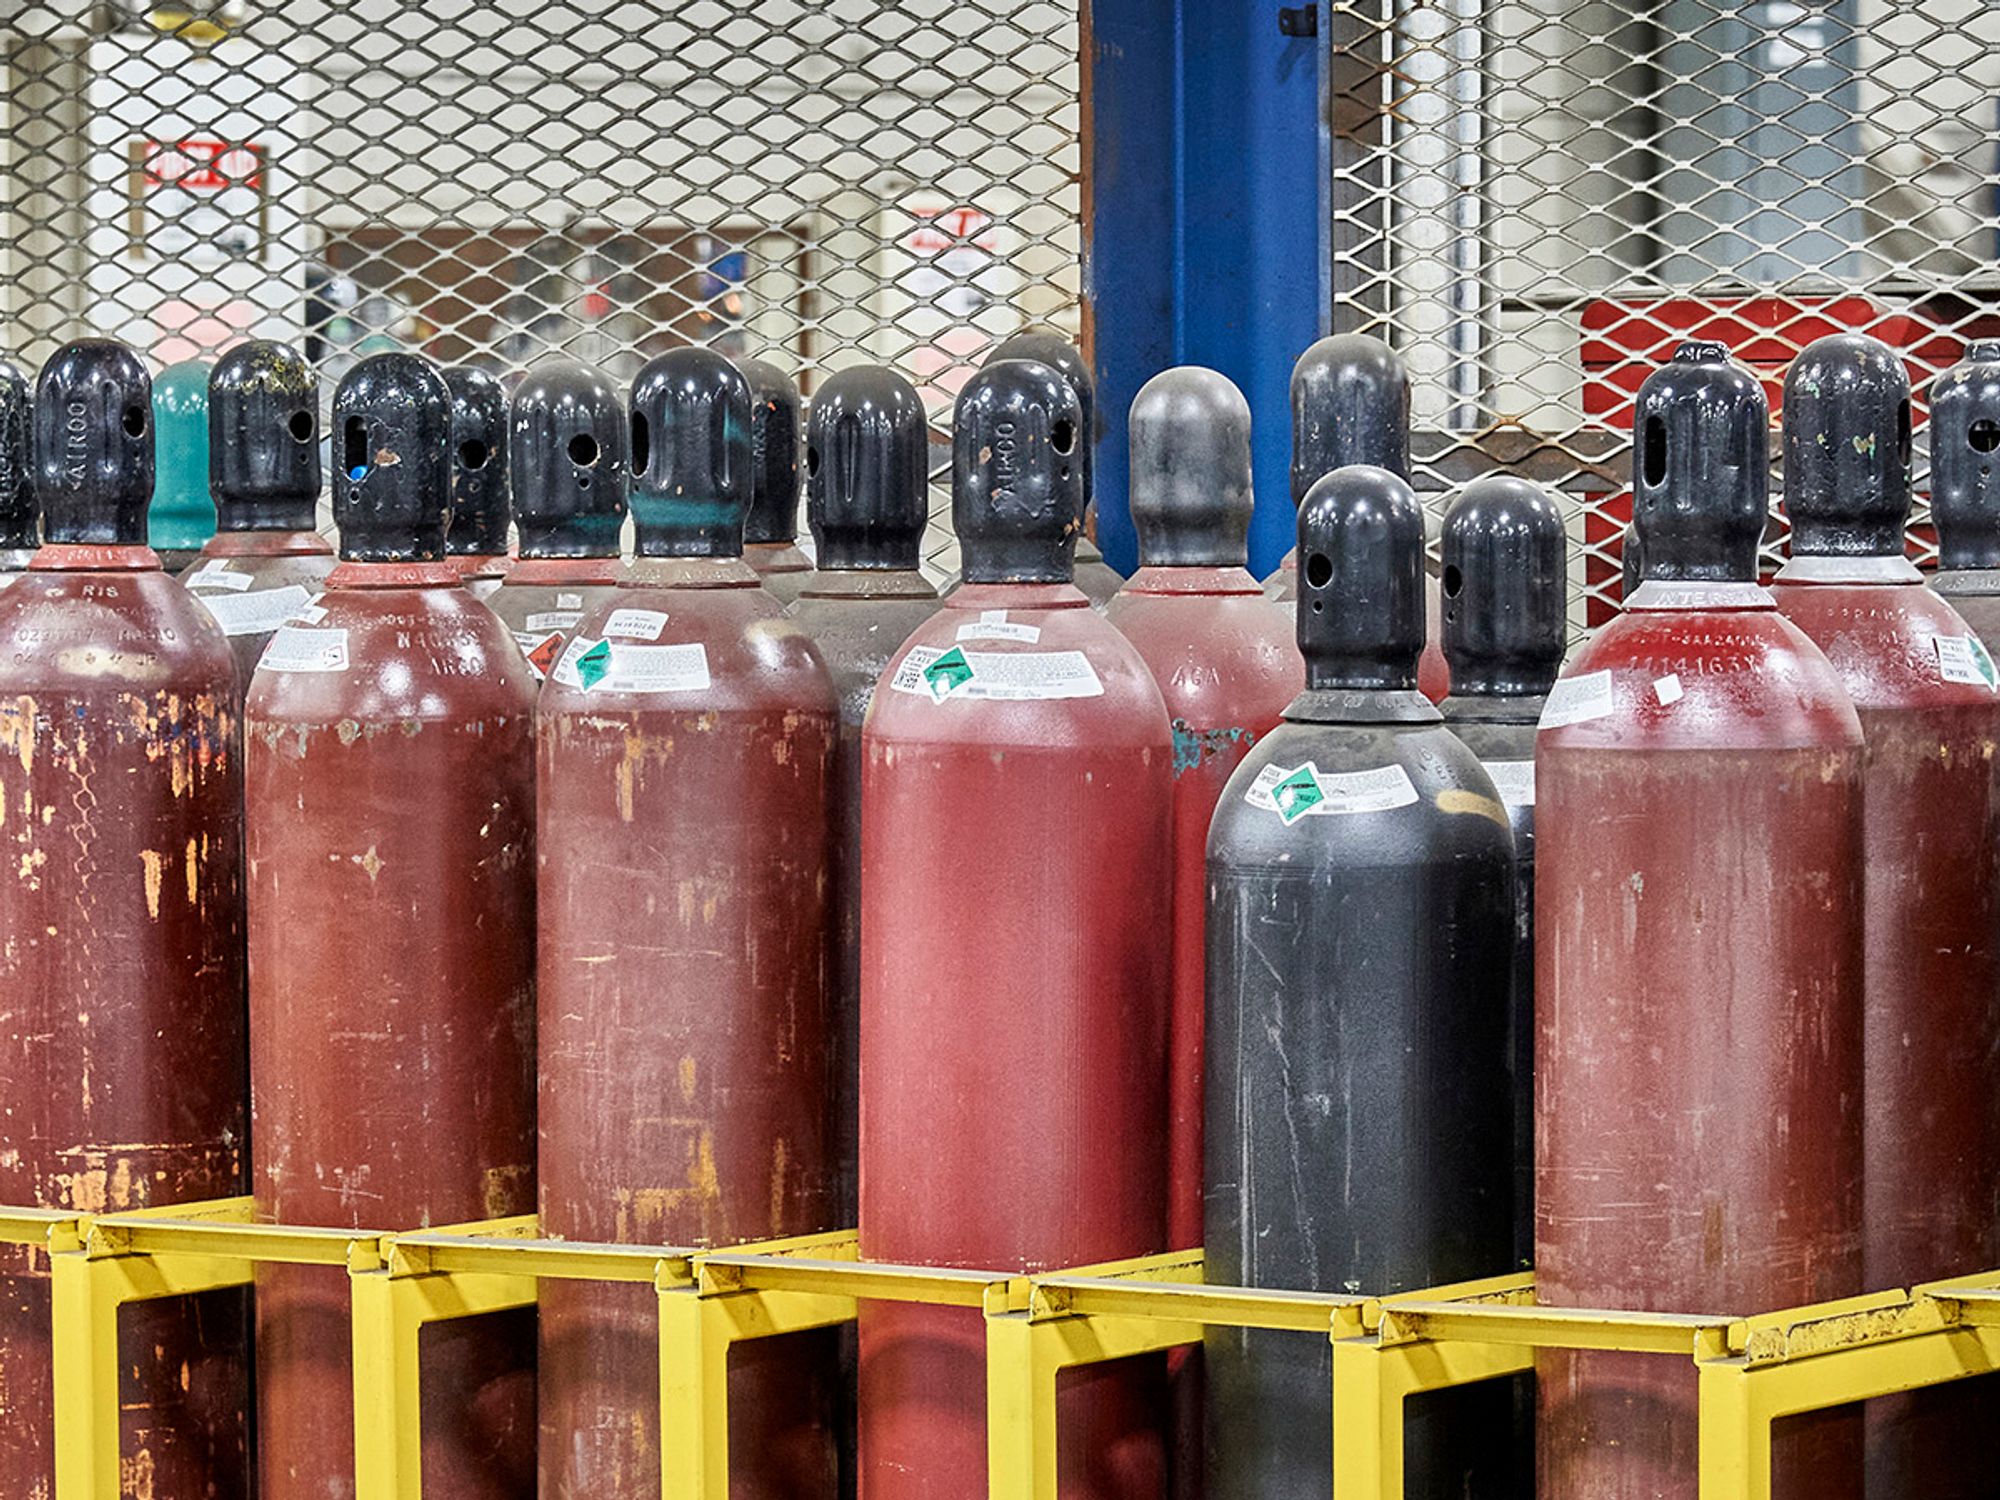 Transporting, moving, and storing compressed gas cylinders